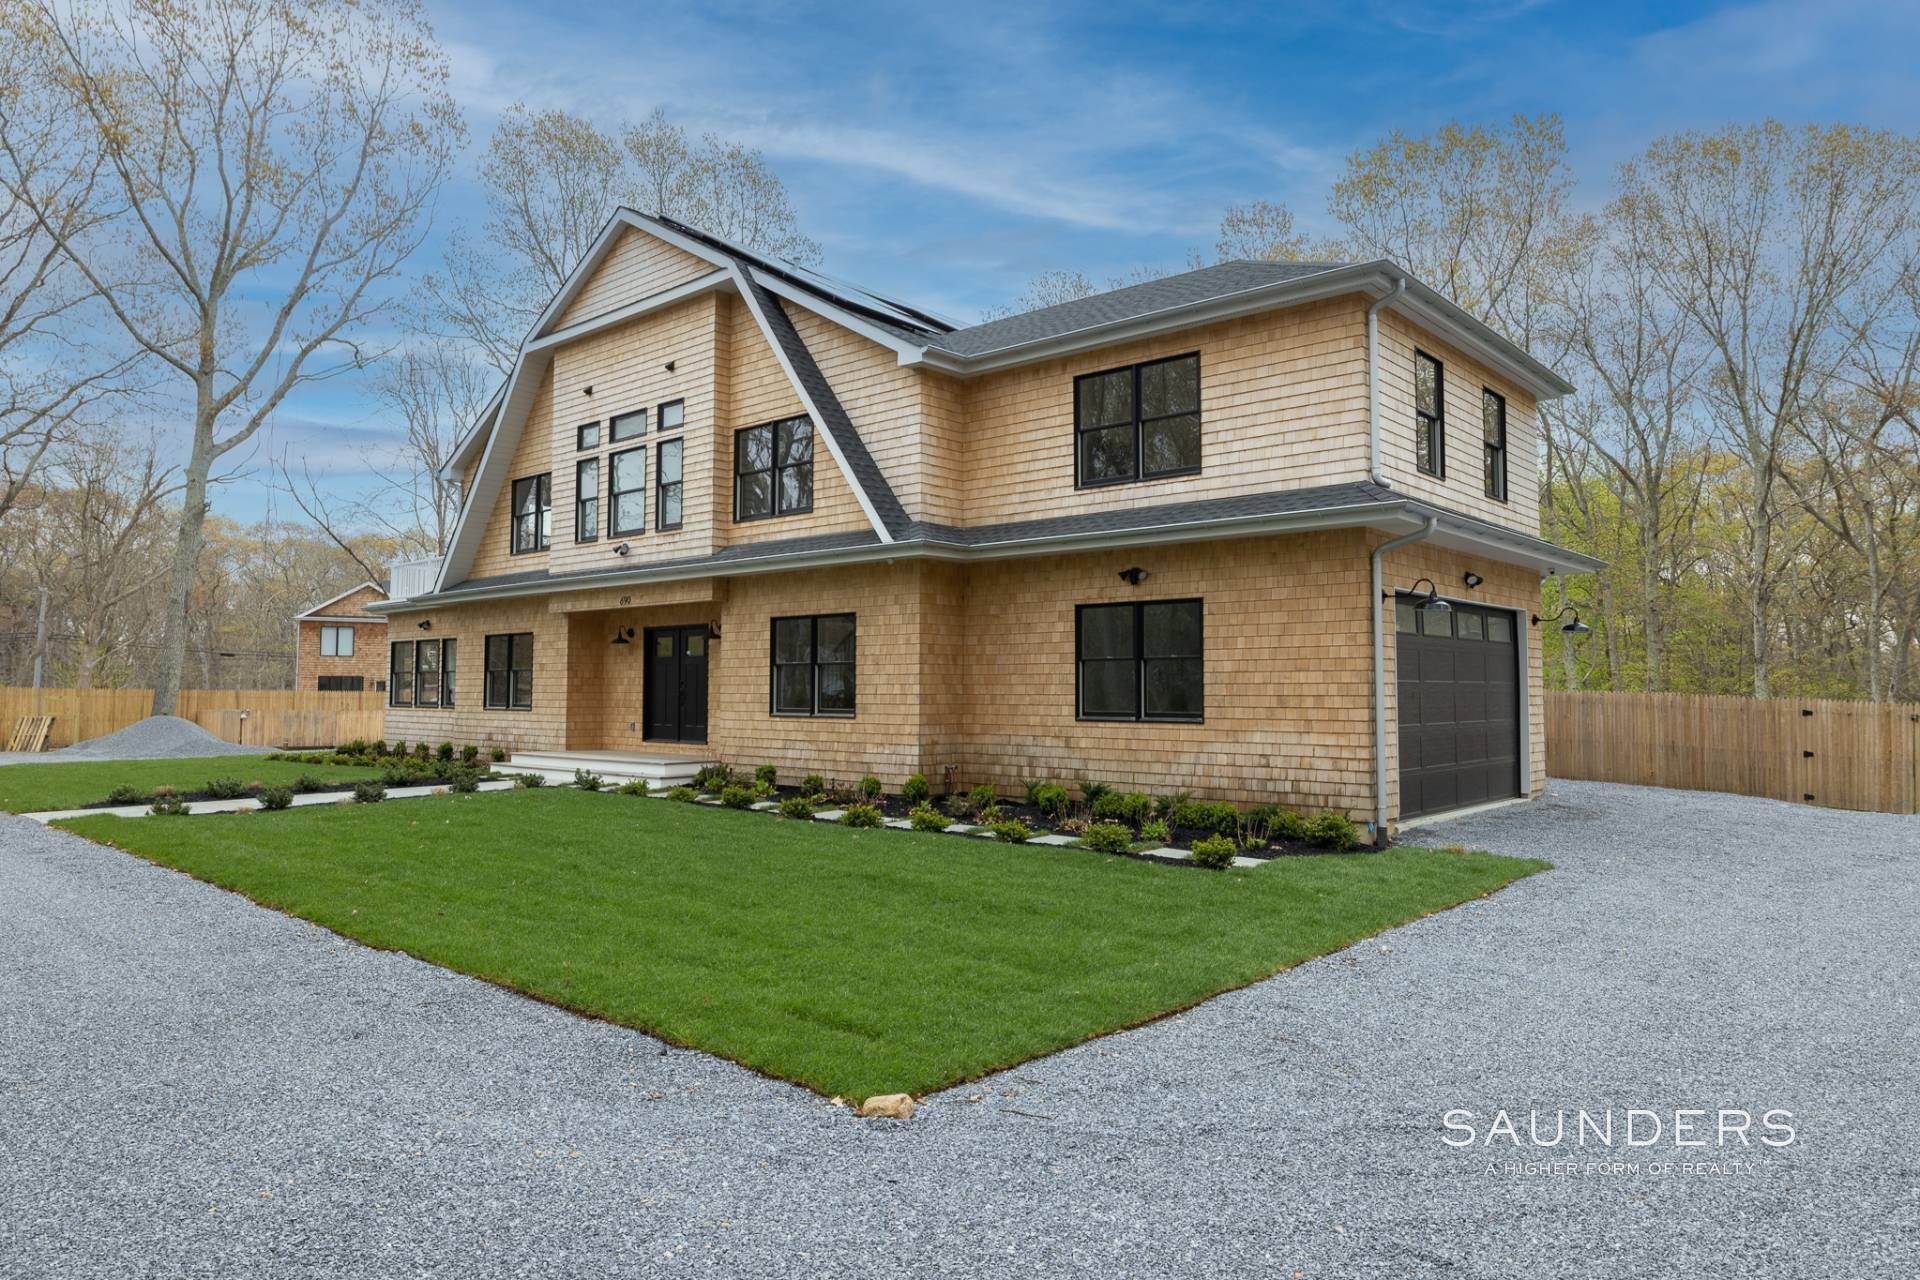 2. Single Family Homes for Sale at New Construction Bridgehampton North Moments From Ocean Beaches 690 Bridgehampton Sag Harbor Turnpike, Bridgehampton, NY 11932